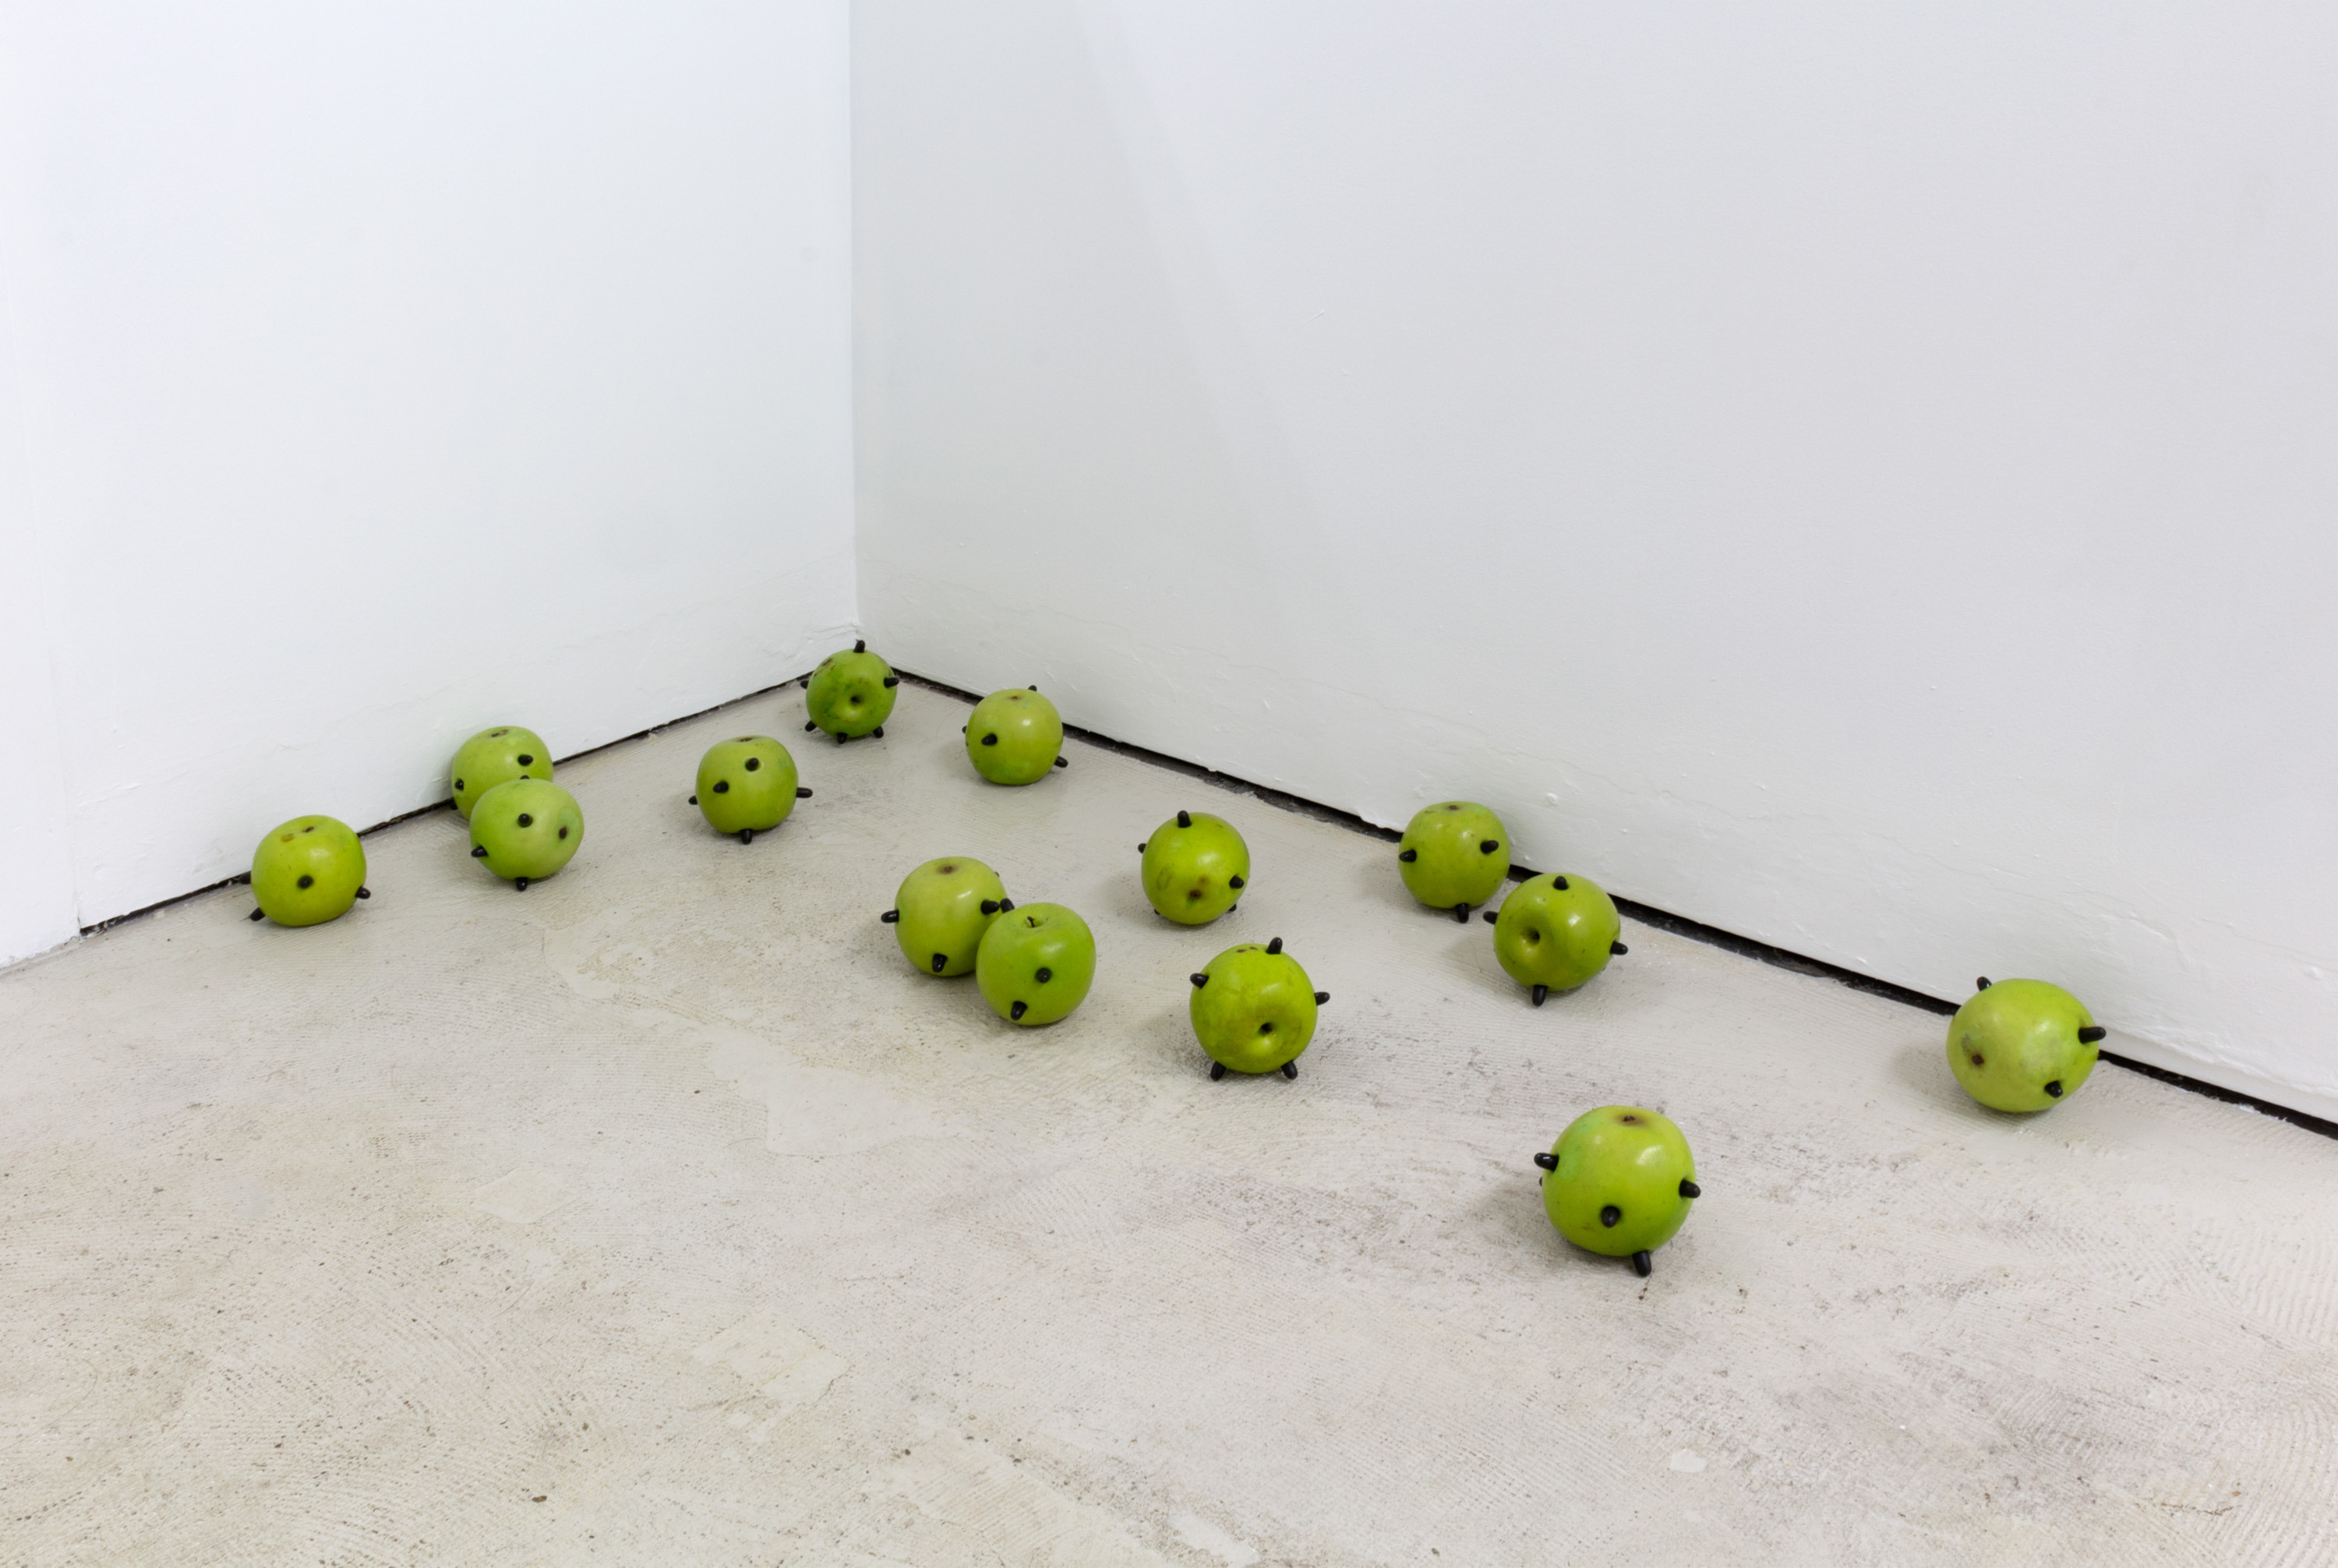 Graham Wiebe, Antipoison Apples, 2022, Plastic apples, activated charcoal pills, Dimensions variable